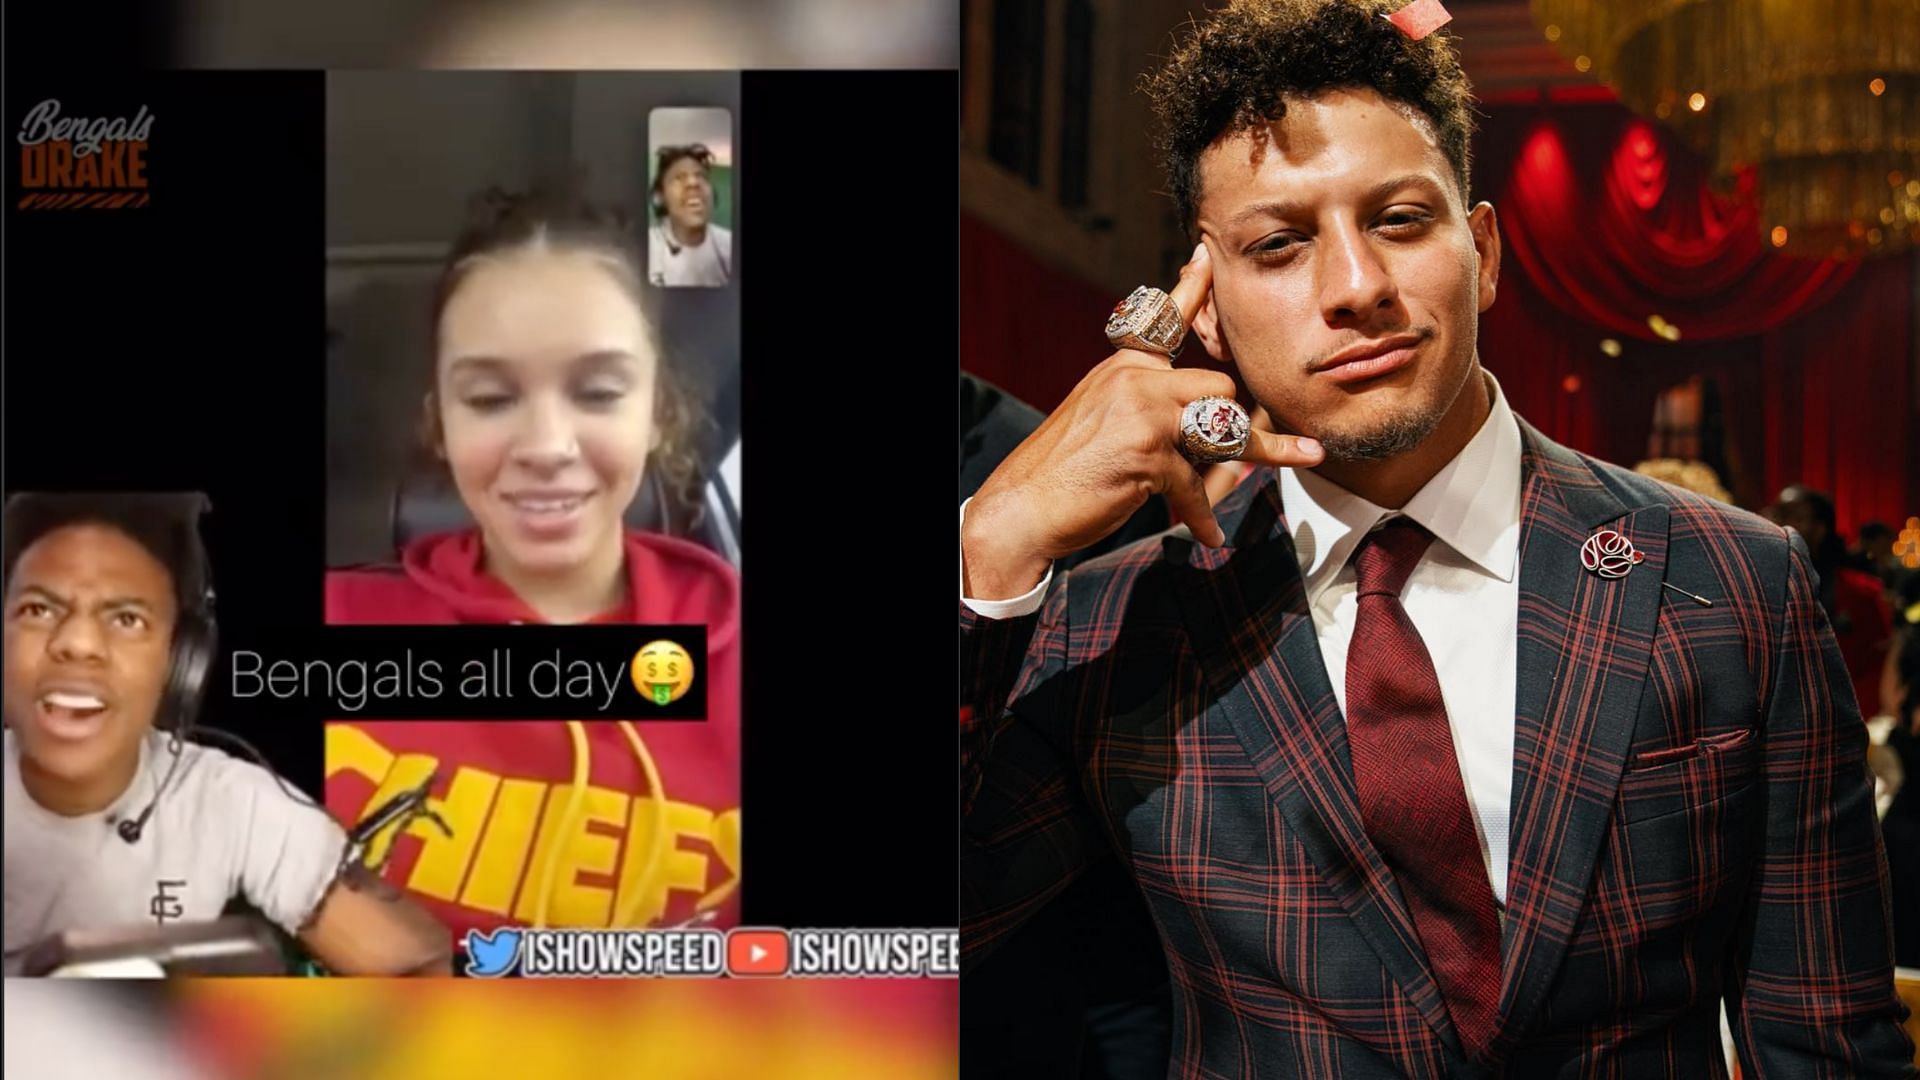 YouTube star Speed makes his allegiance known after insulting Patrick Mahomes and the Chiefs